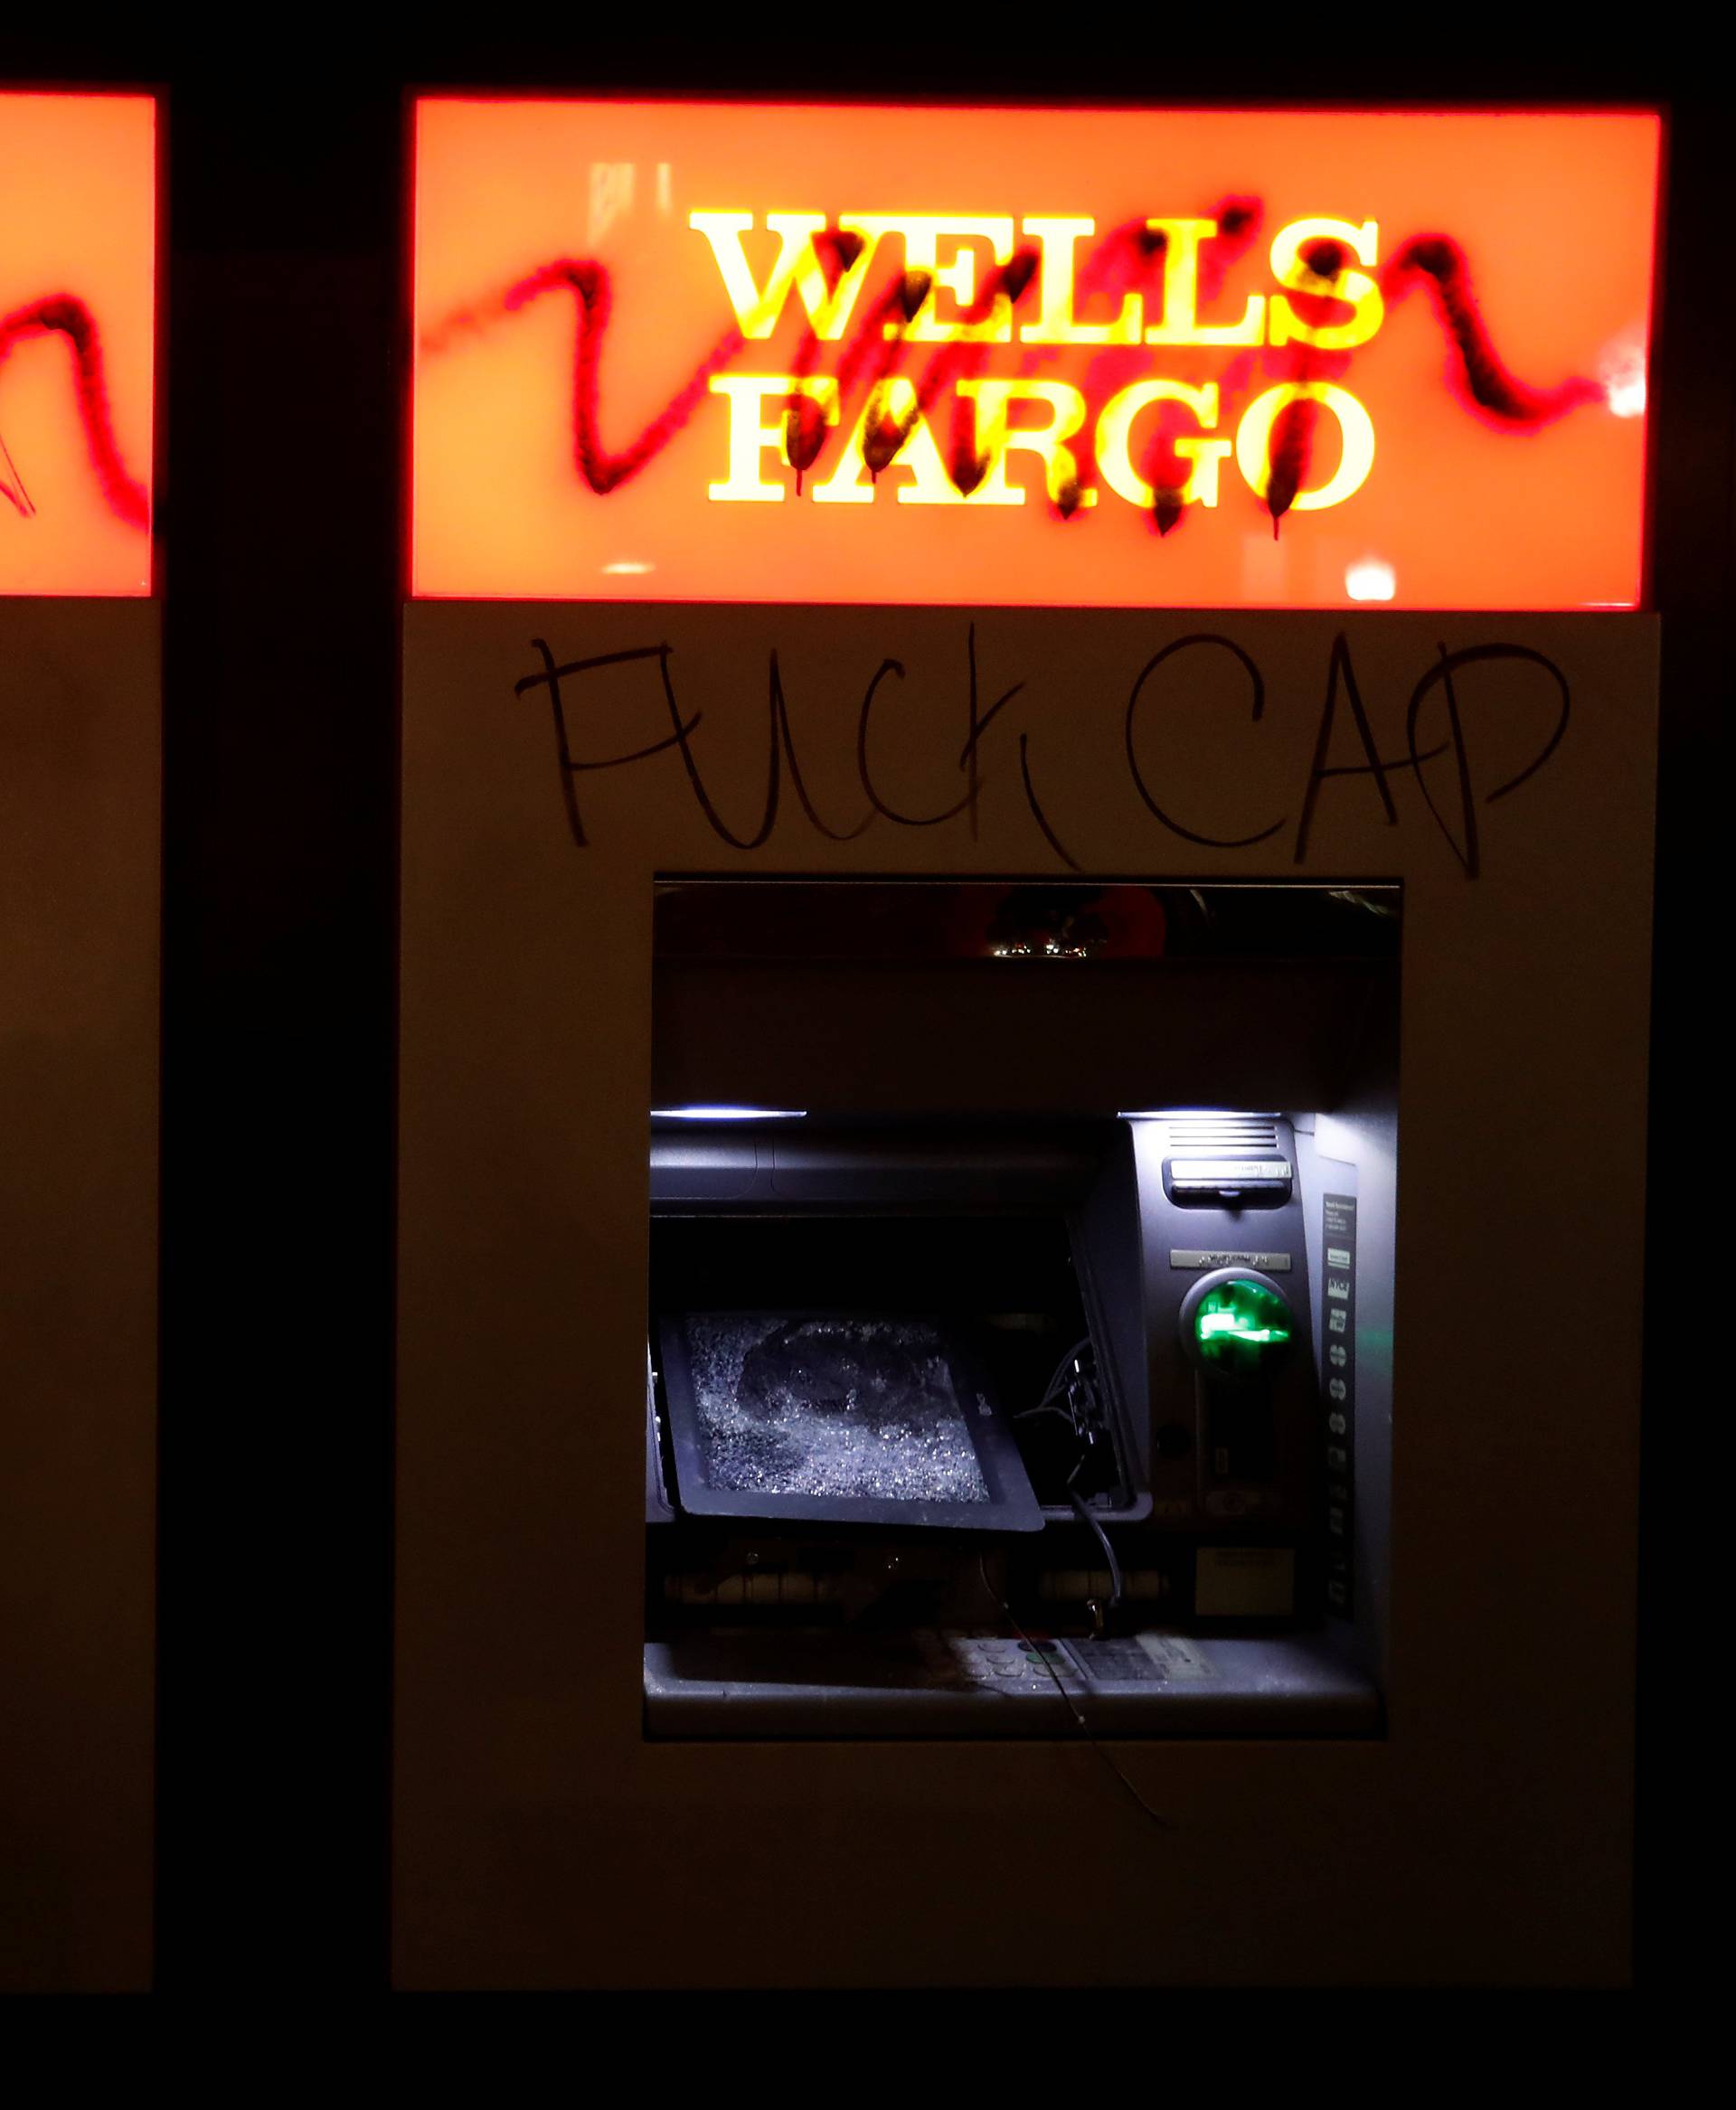 Vandalized ATMs are seen at a Wells Fargo bank after a student protest turned violent at UC Berkeley during a demonstration over right-wing speaker Milo Yiannopoulos, who was forced to cancel his talk, in Berkeley, California